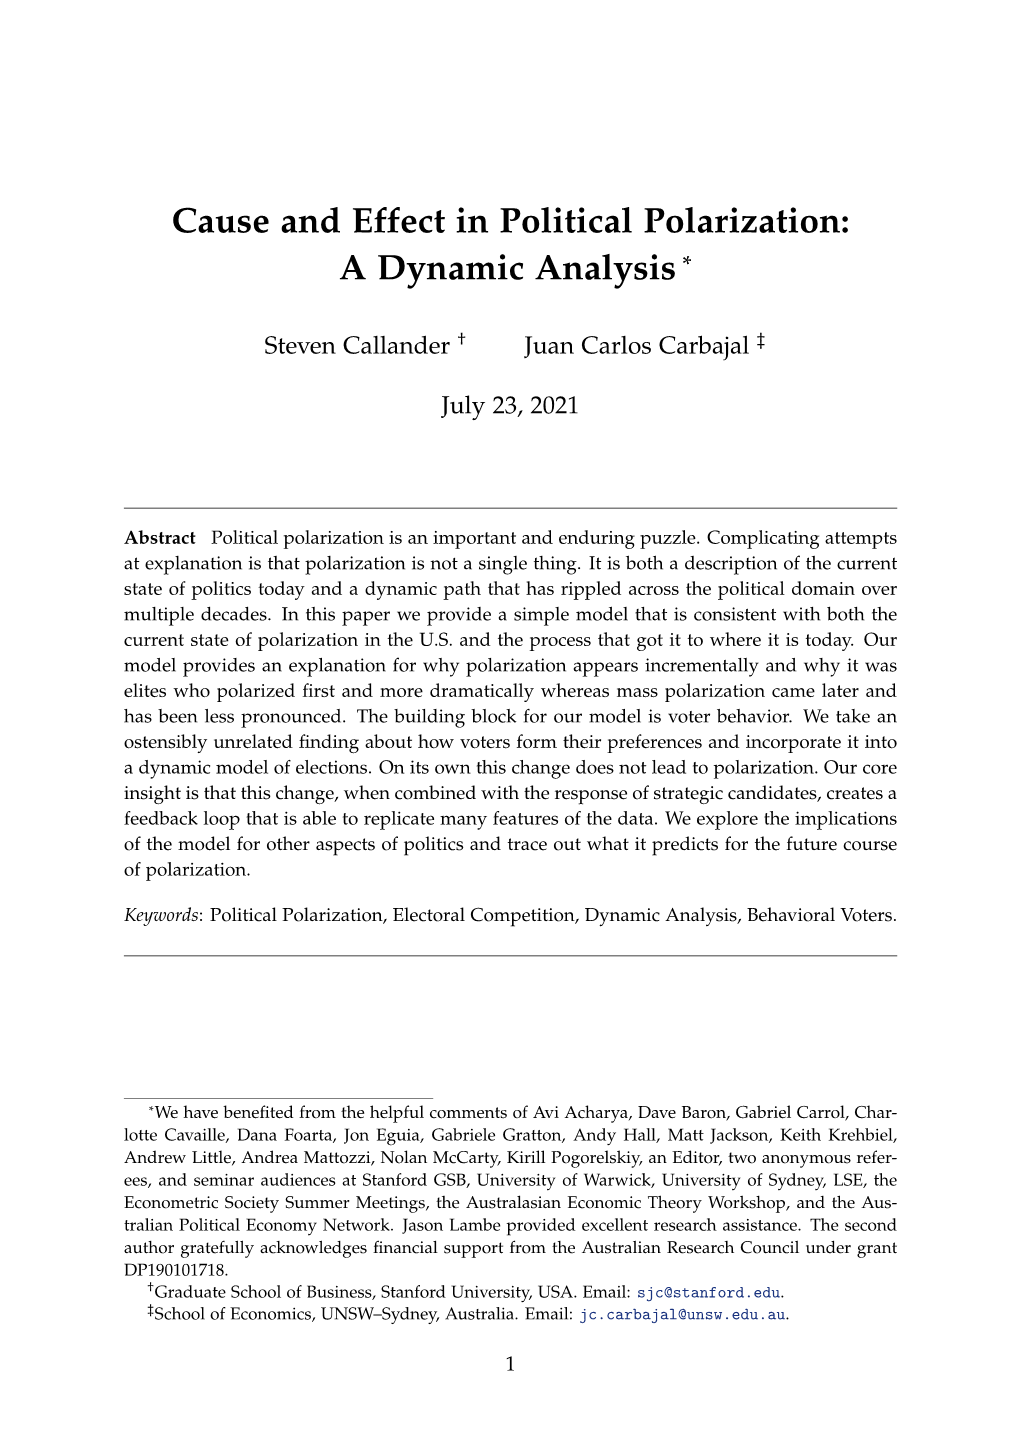 Cause and Effect in Political Polarization: a Dynamic Analysis*